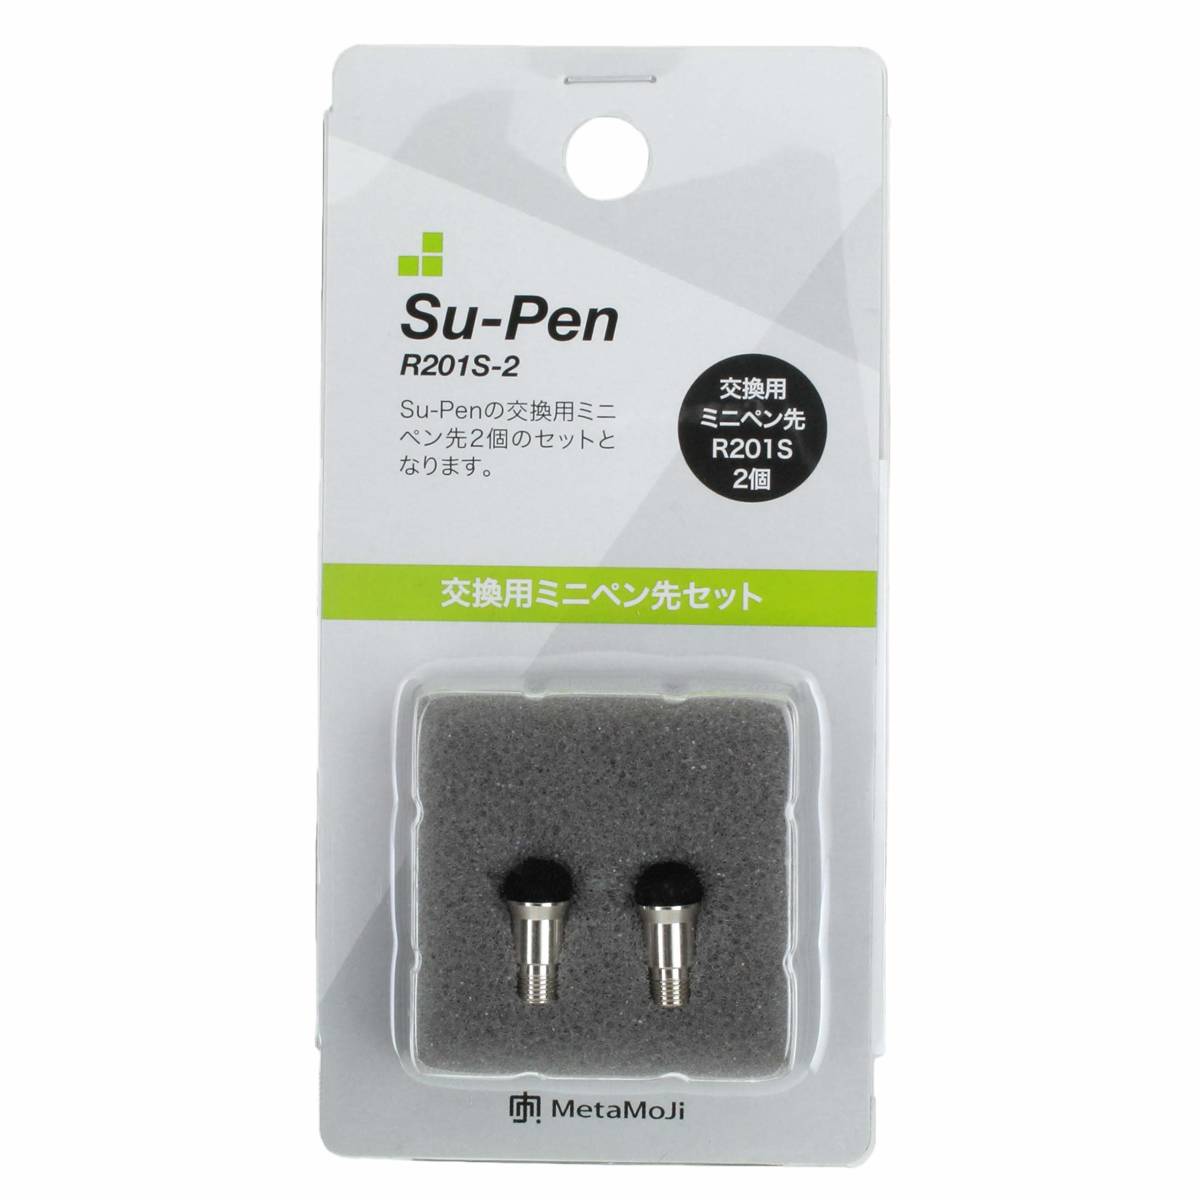 [ well-selling goods commodity ]R201S-2 for exchange Mini pen .2 piece set Su-Pen